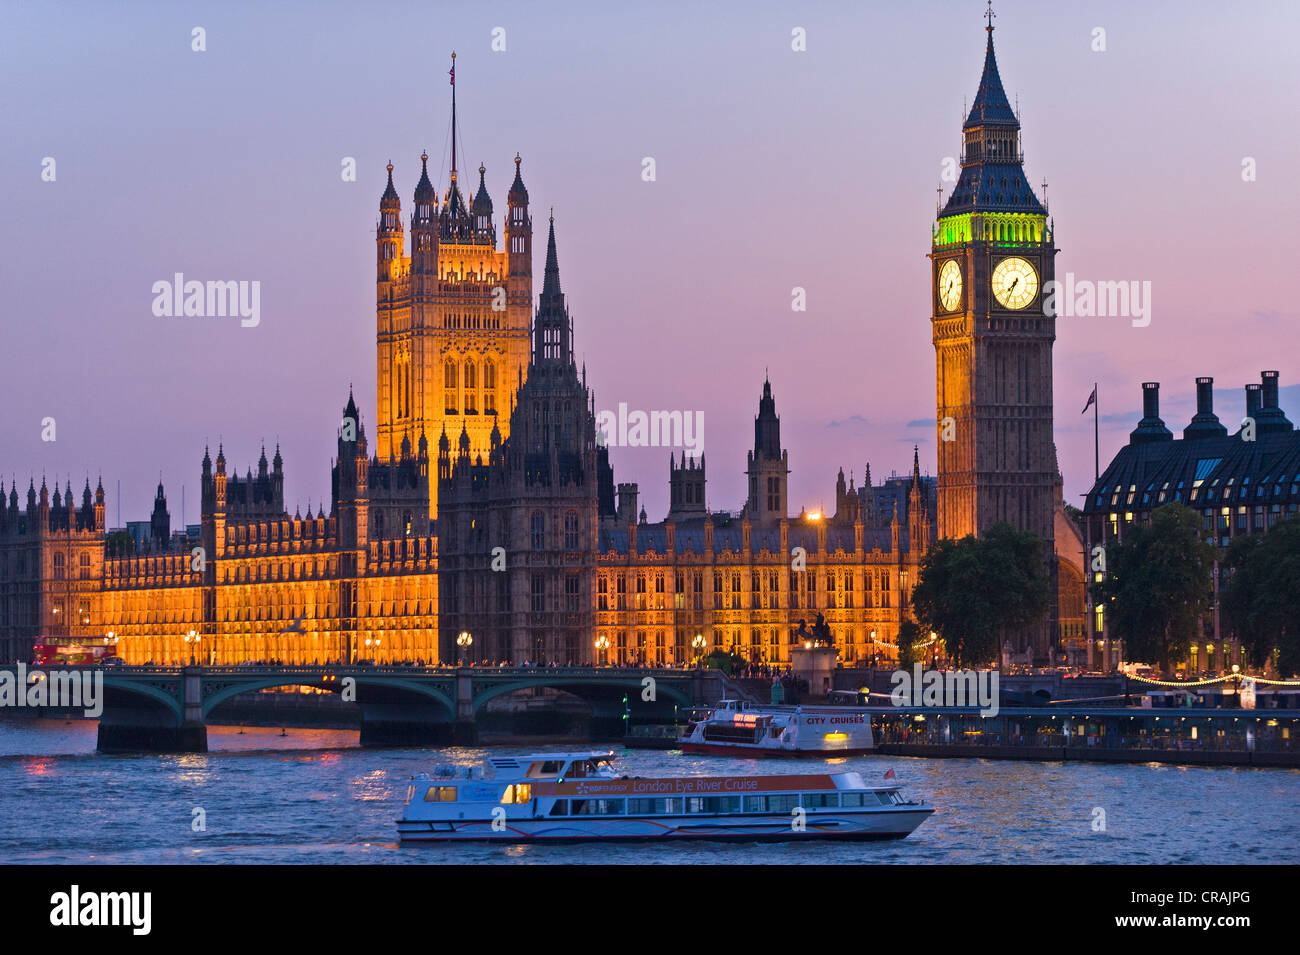 Themse, Big Ben, Houses of Parlament, Palace of Westminster, London, England, Vereinigtes Königreich, Europa Stockfoto